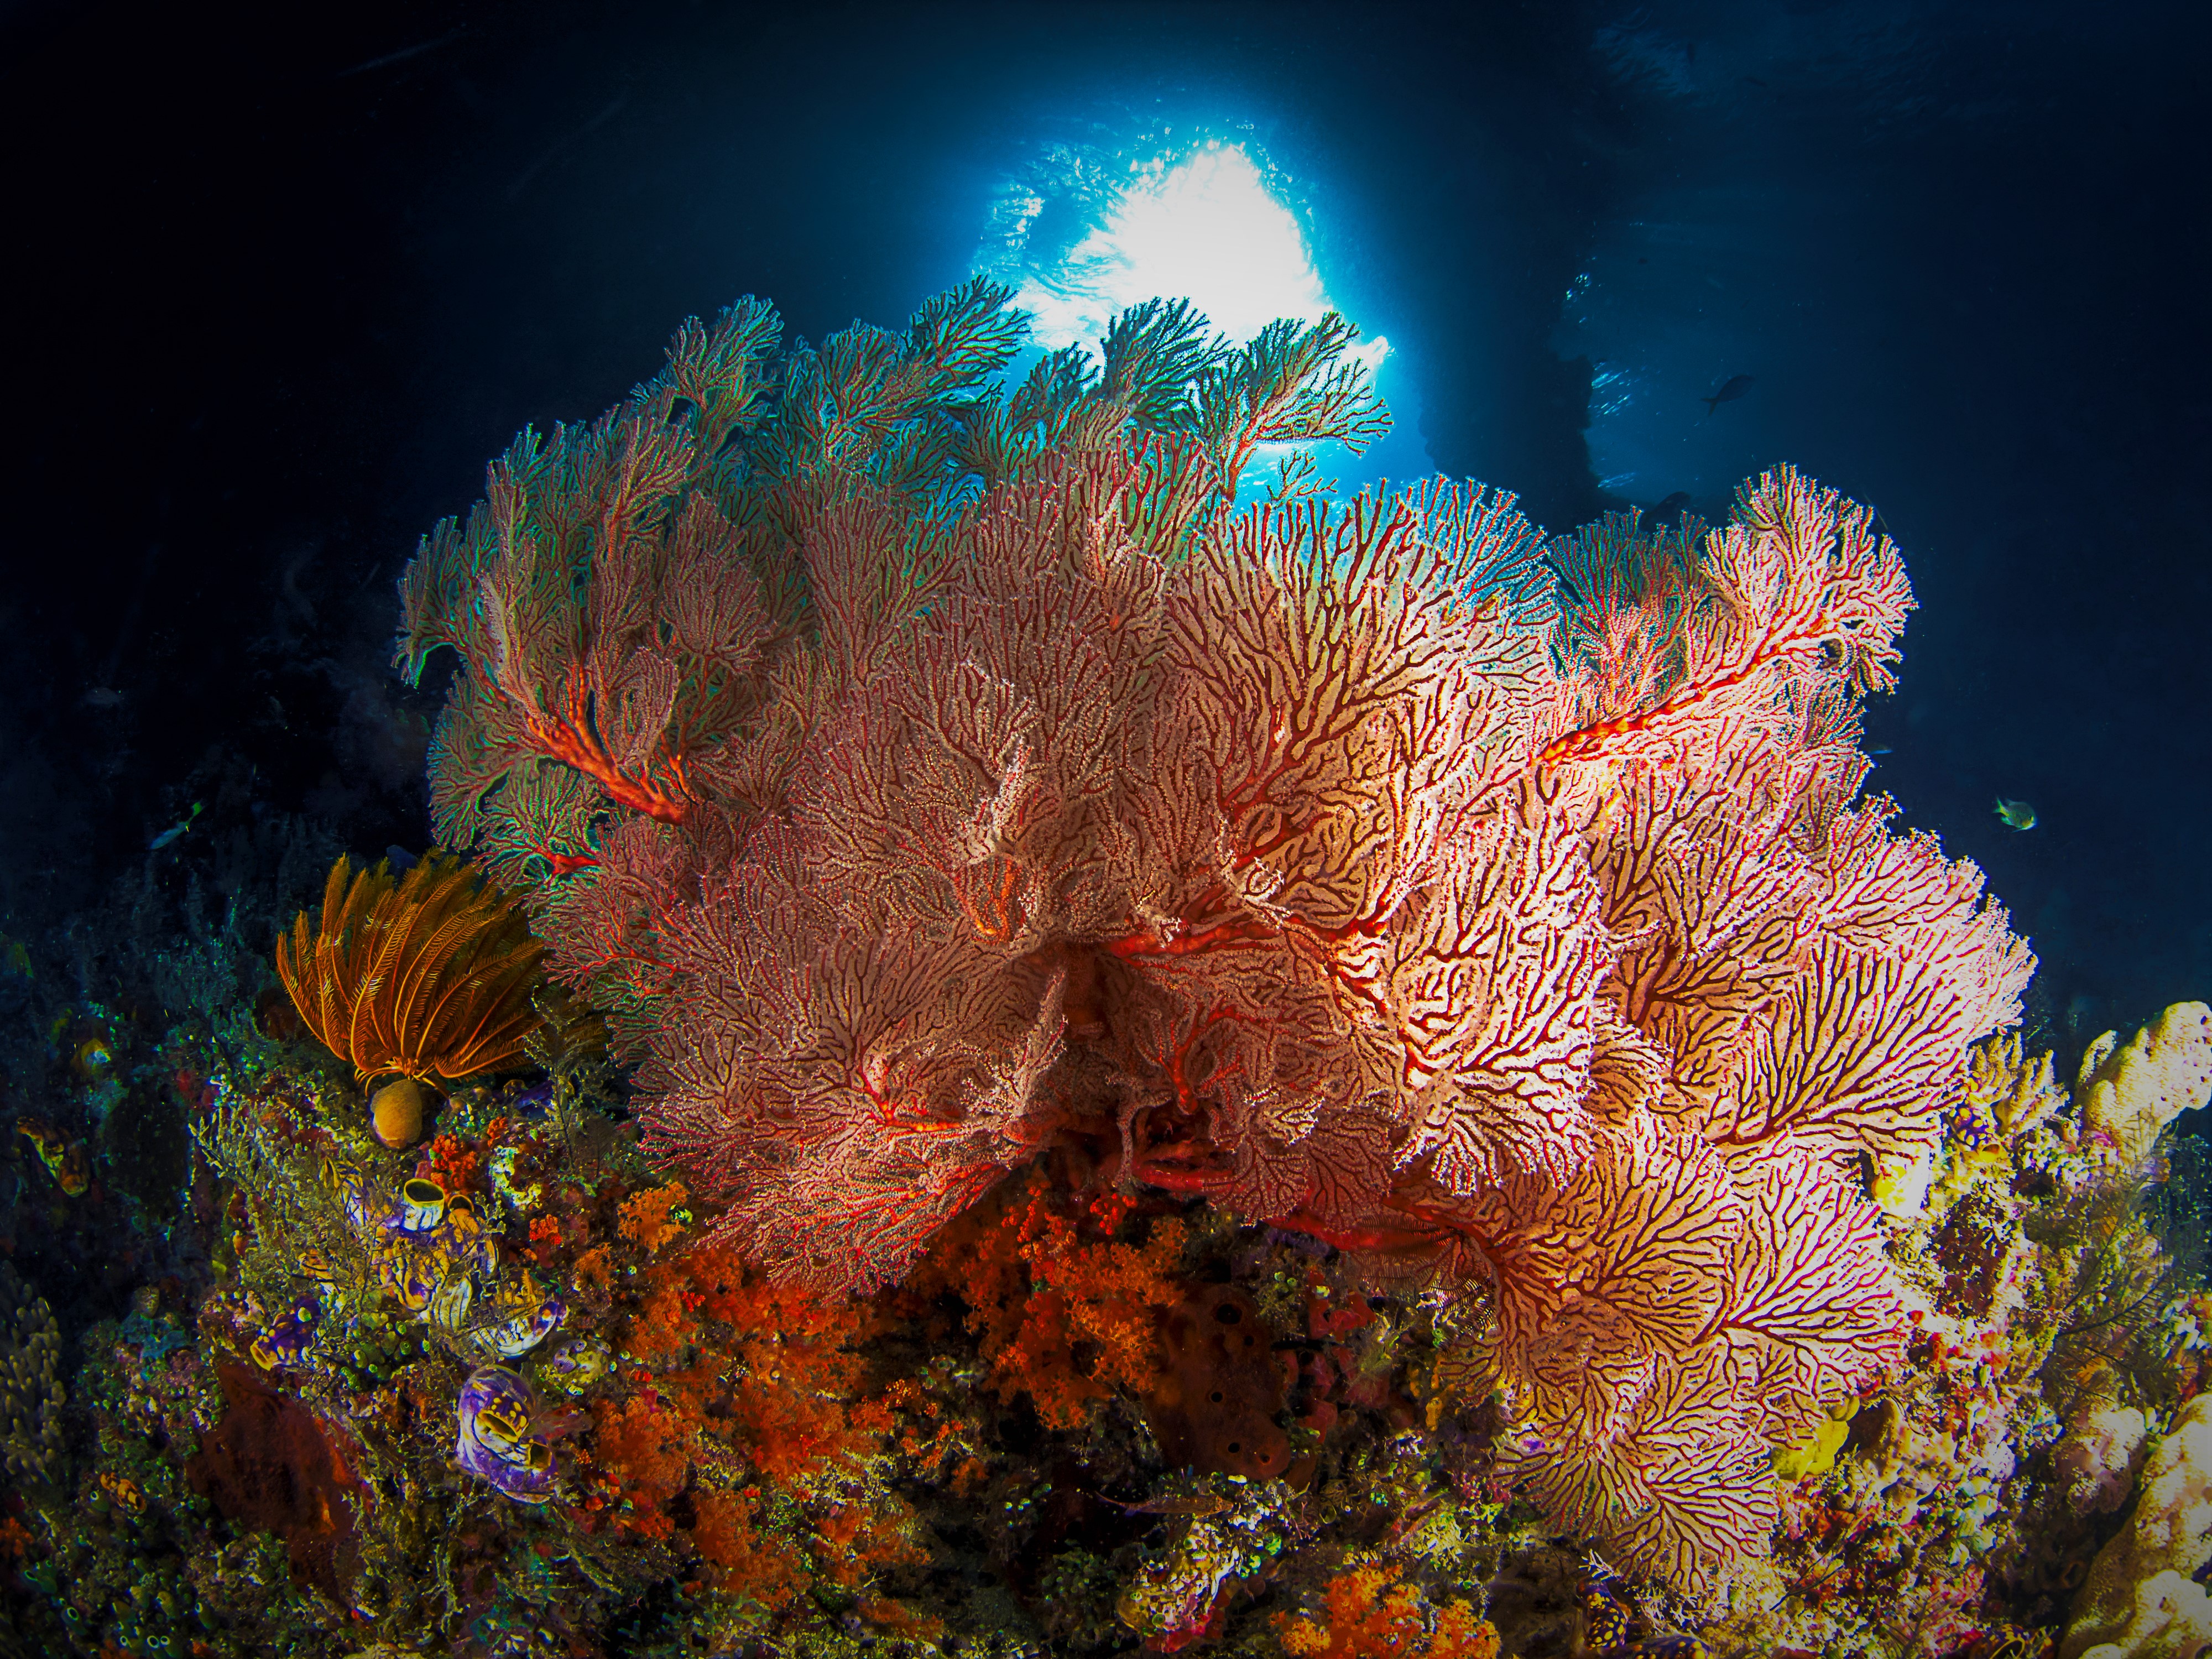 Sunlight Shining on Coral Under the Sea